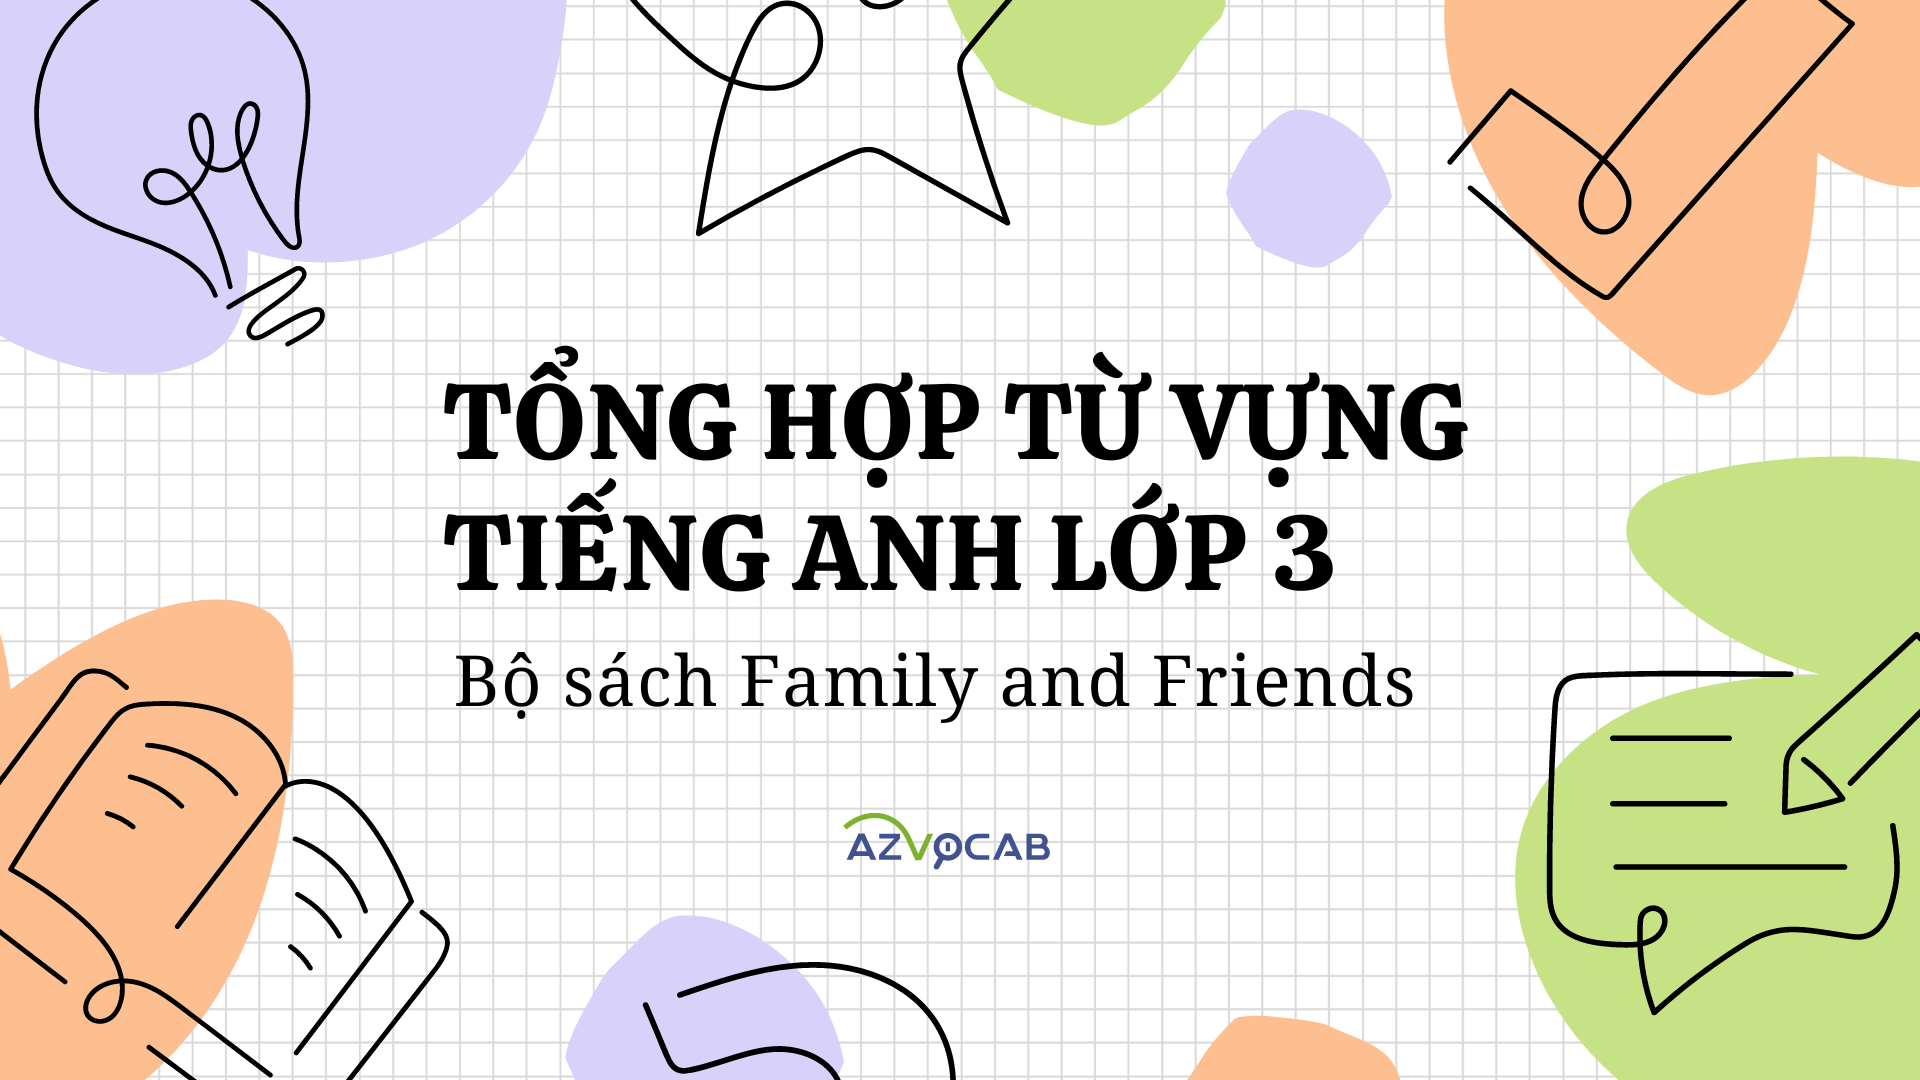 Tiếng Anh lớp 3 Family and Friends